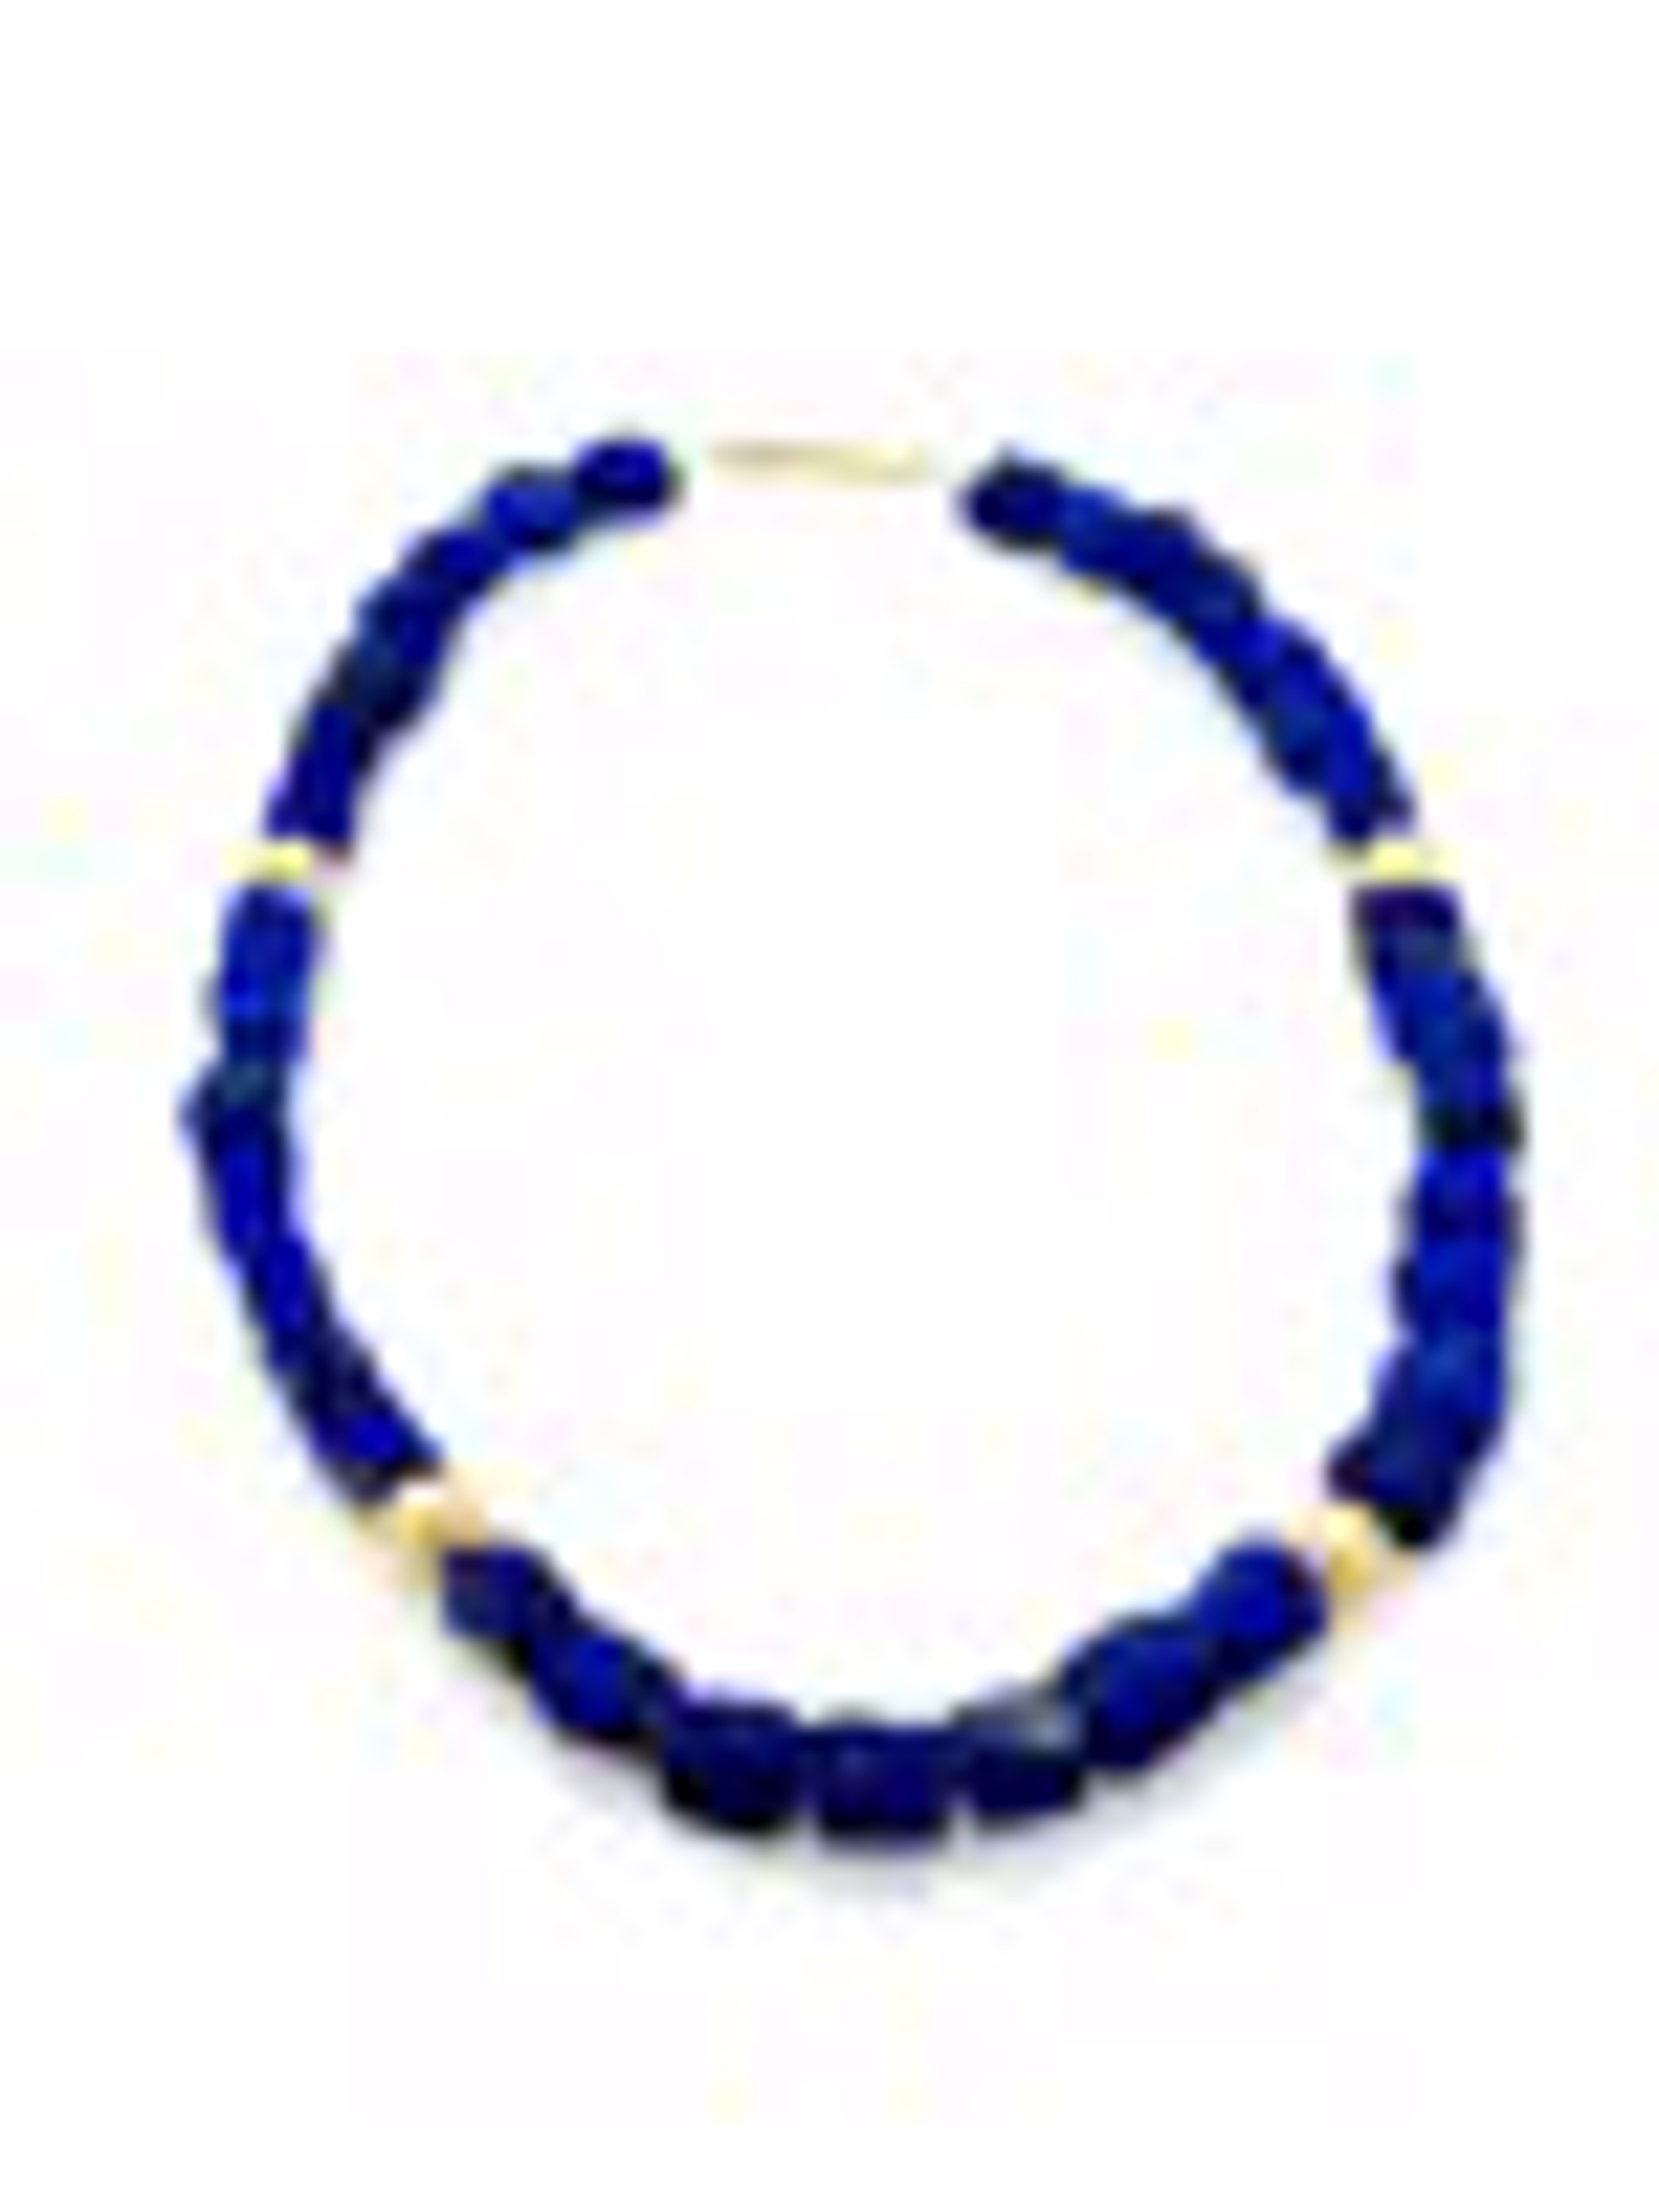 Lapis 232.3 cts, 18k gold by Mara Labell